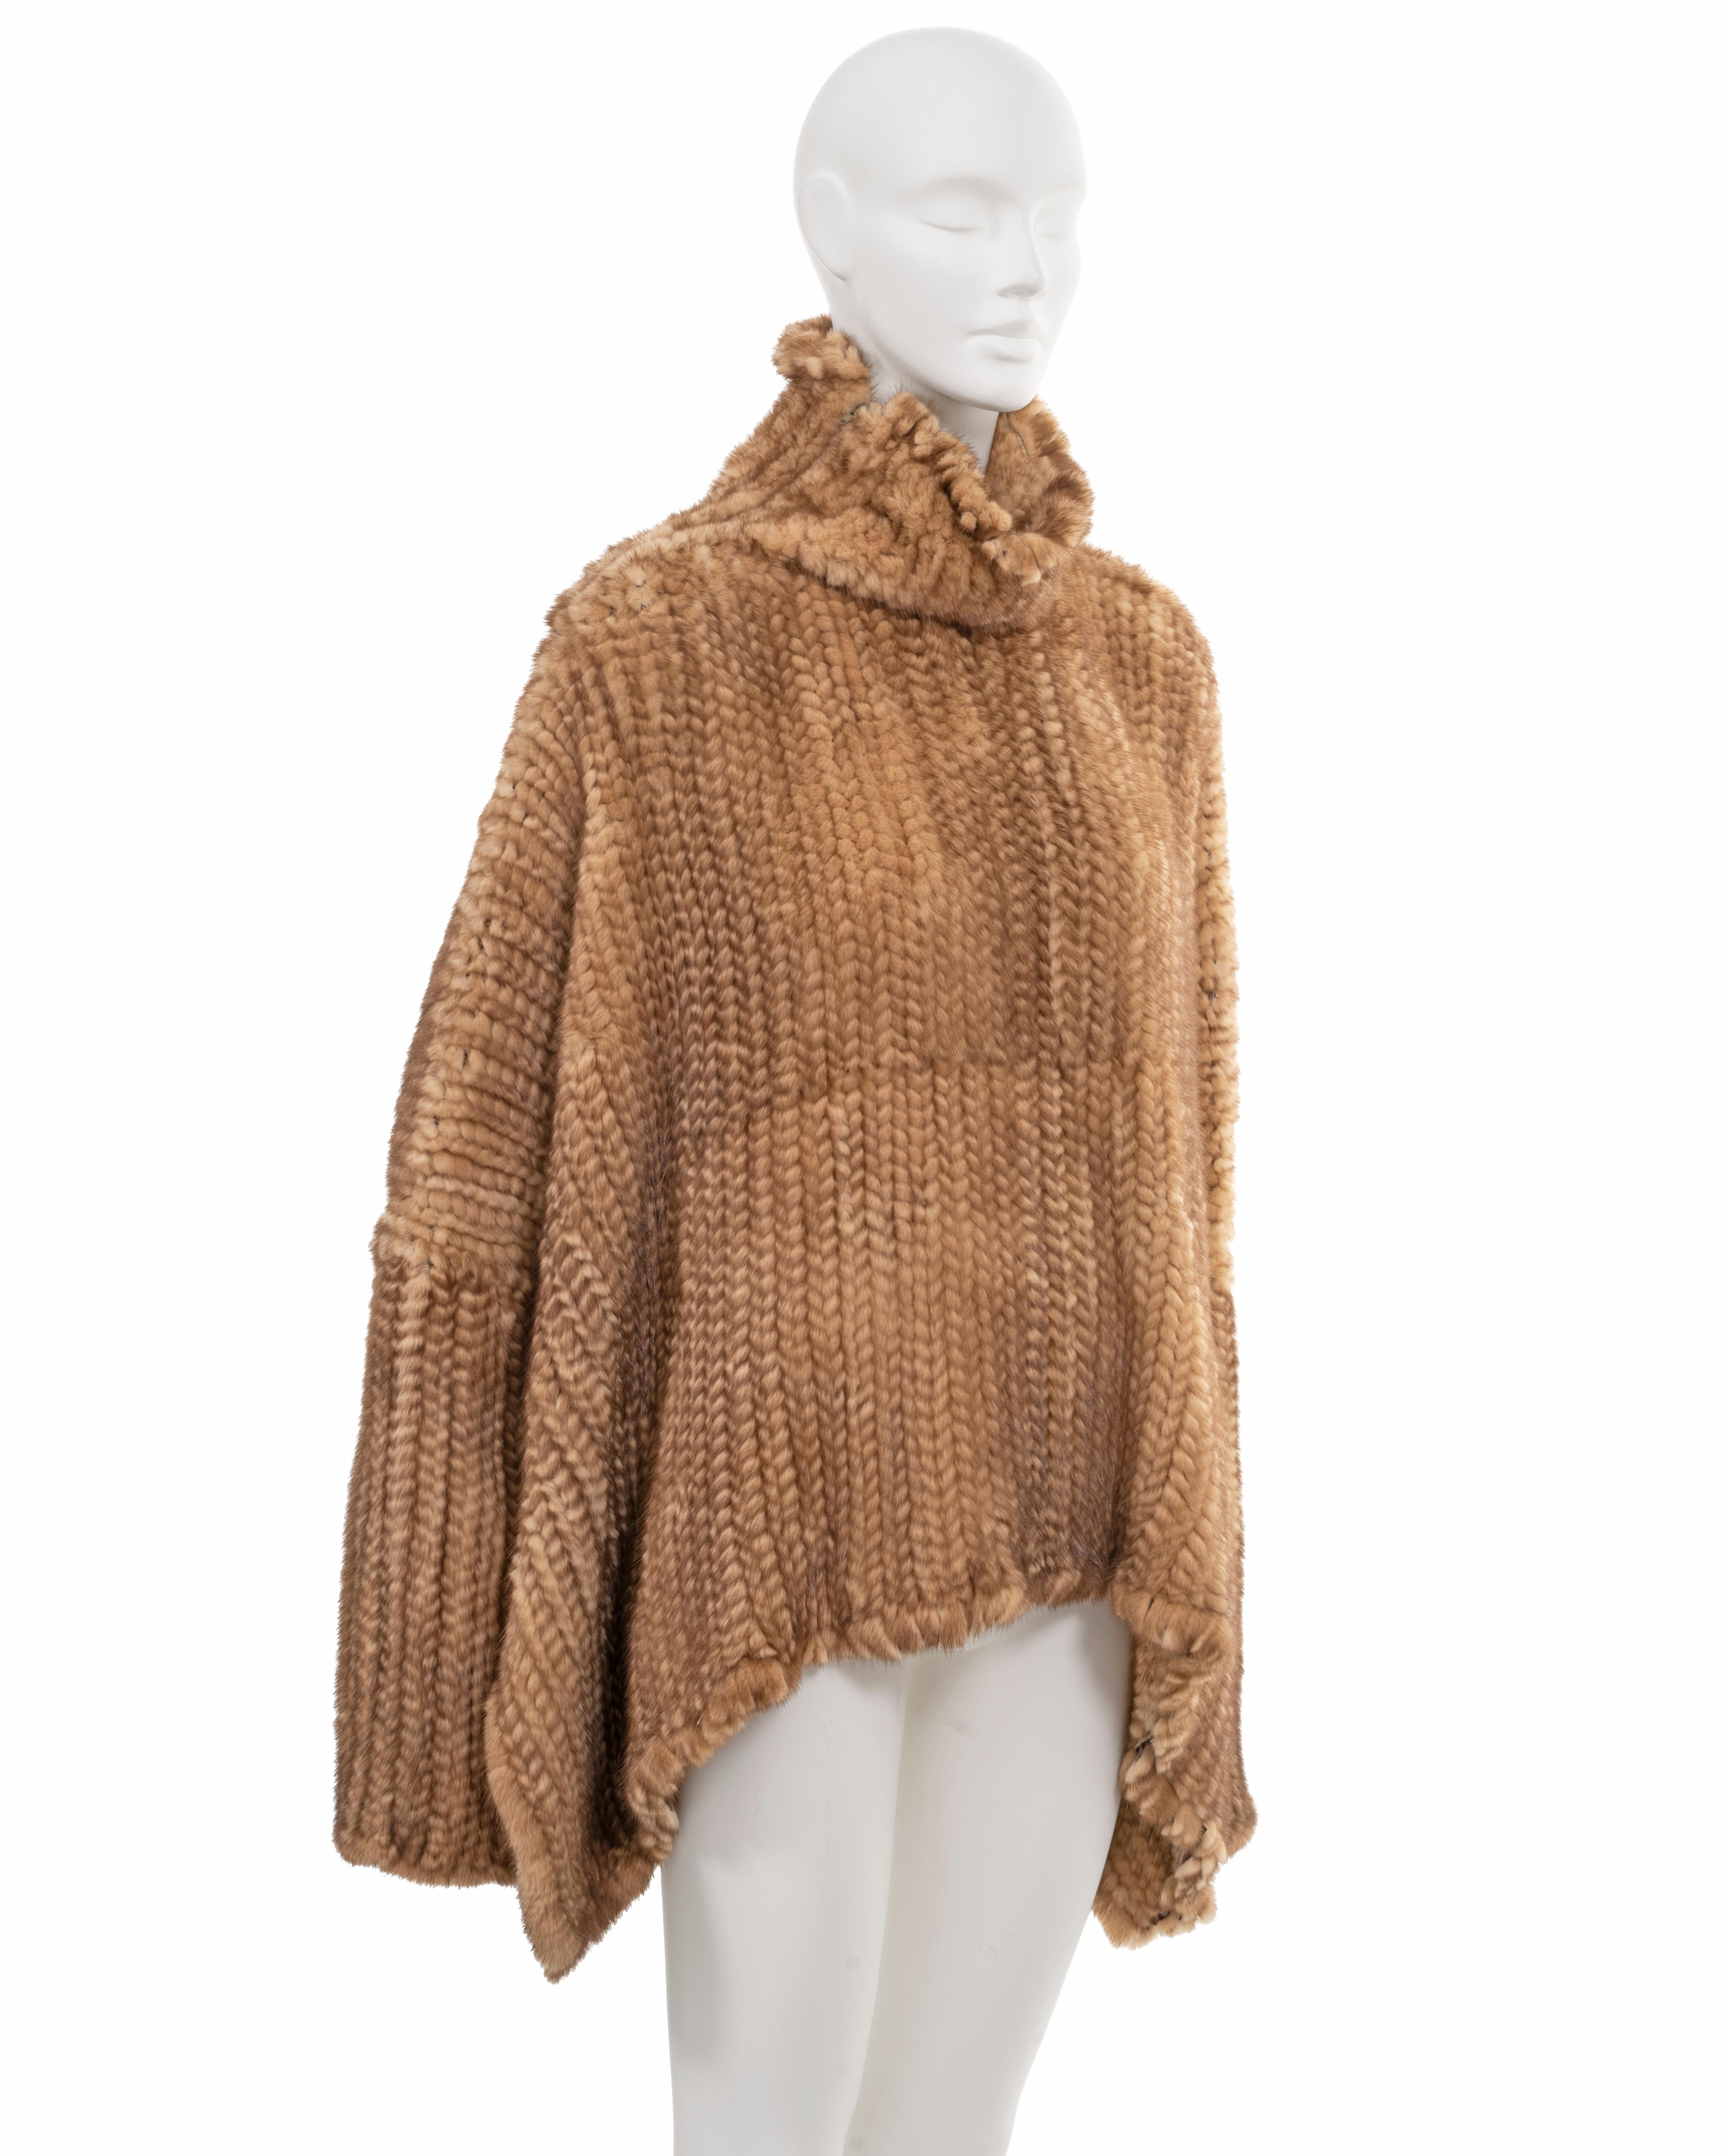 Christian Dior by John Galliano knitted mink fur oversized sweater, fw 2000 For Sale 4